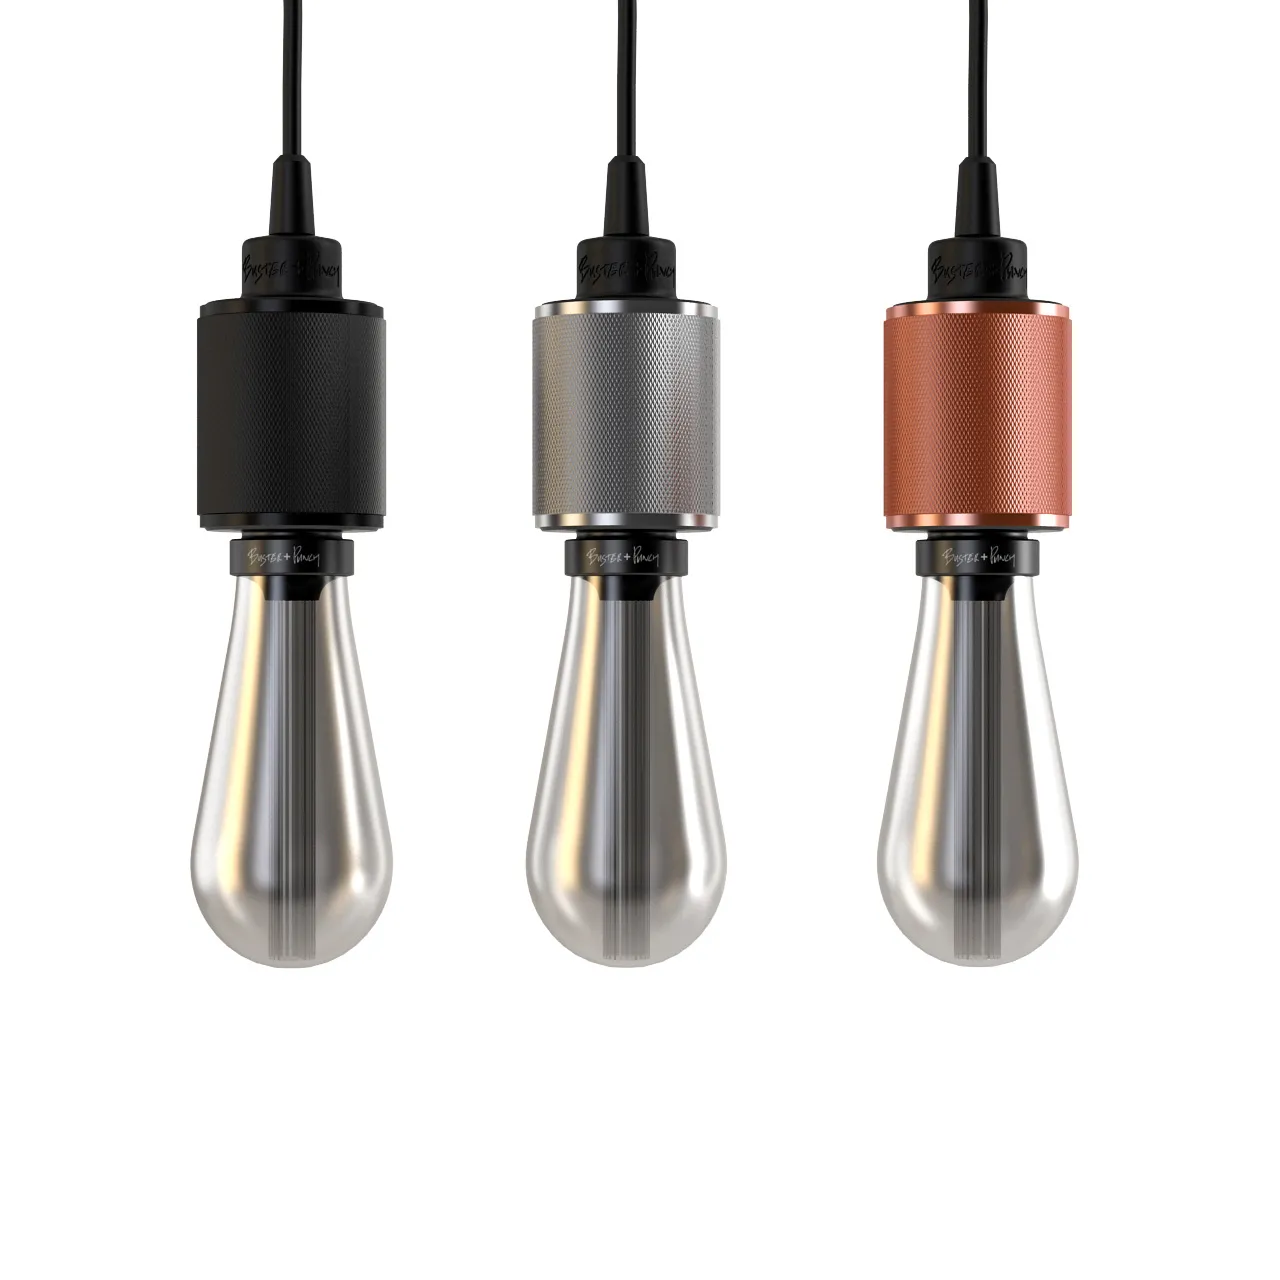 Lighting – led-buster-bulb-by-buster-punch